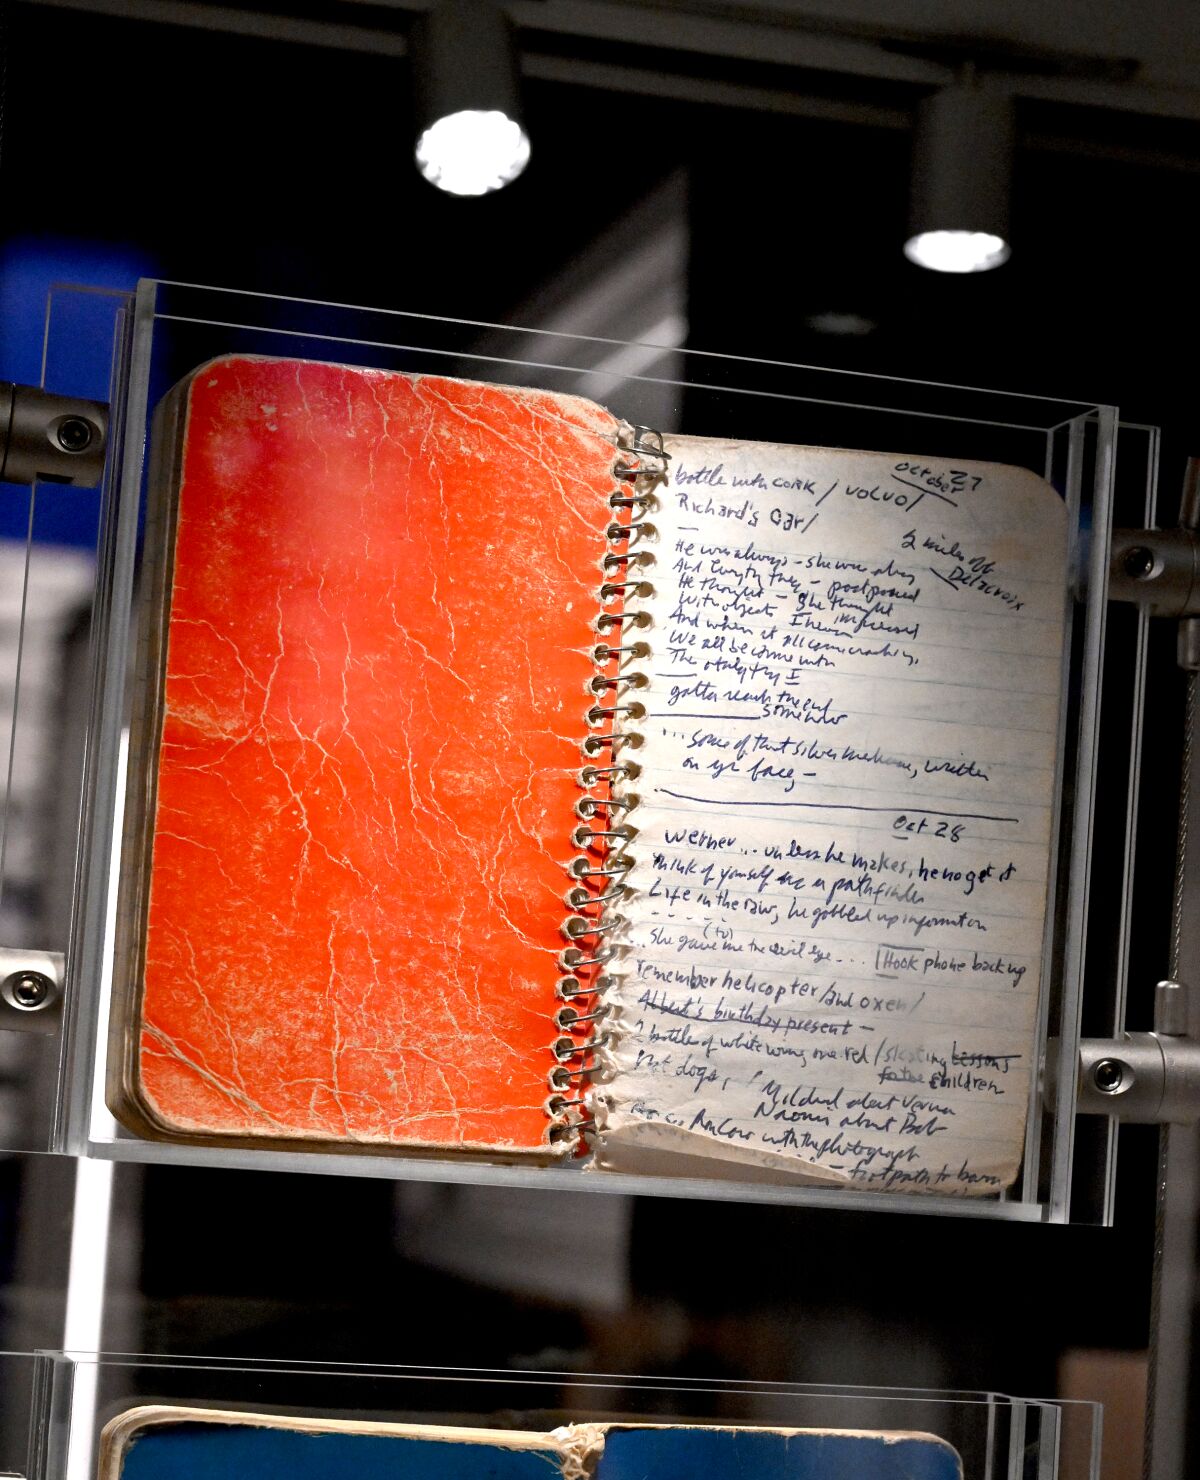 A notebook with handwritten lyrics in a museum display case